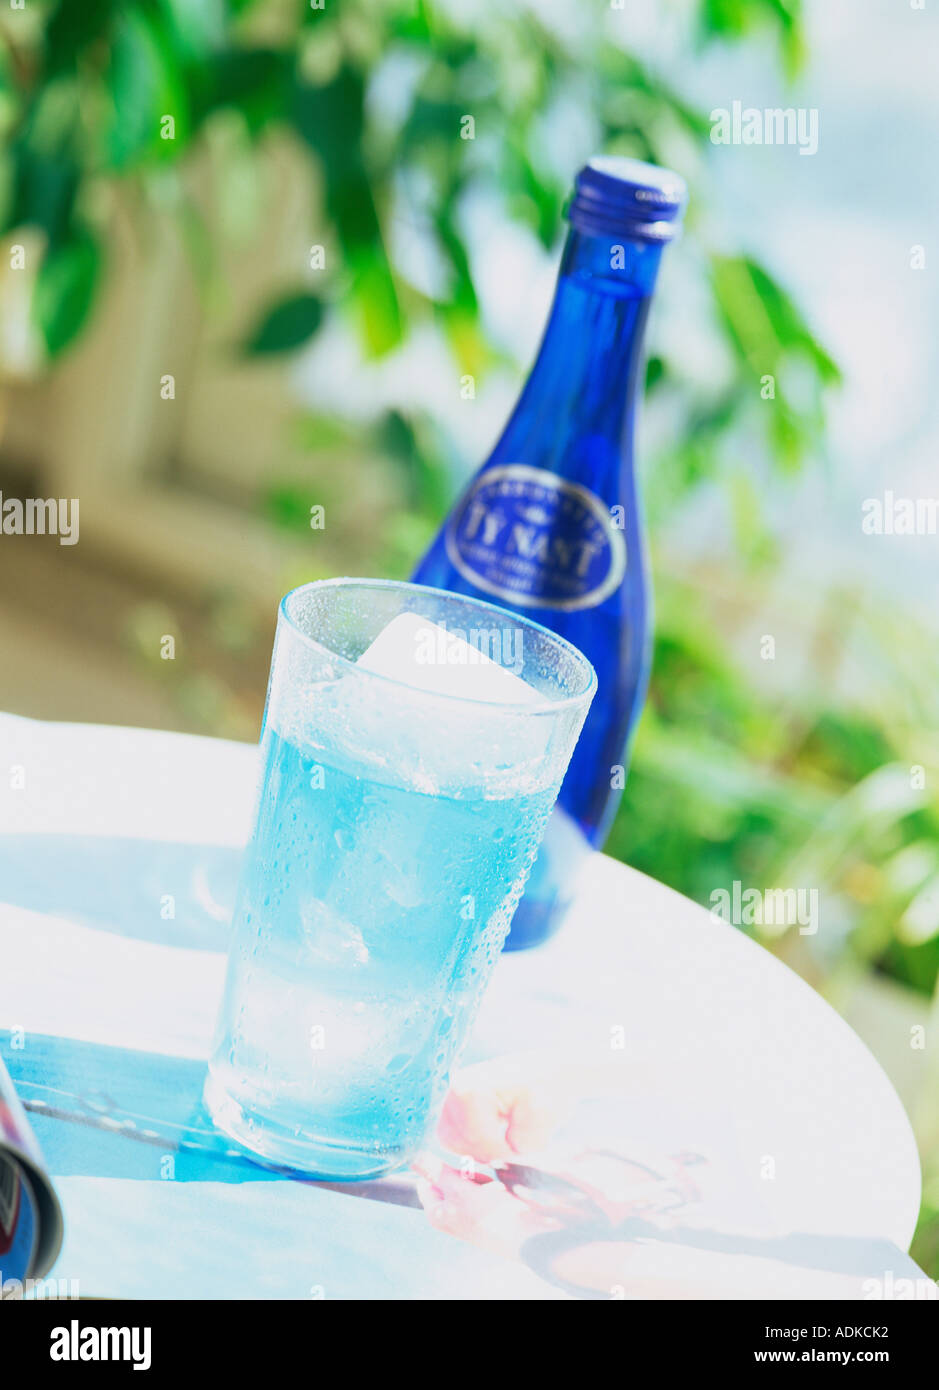 drink beverage blue Hawaii cocktail and wine bottle Stock Photo